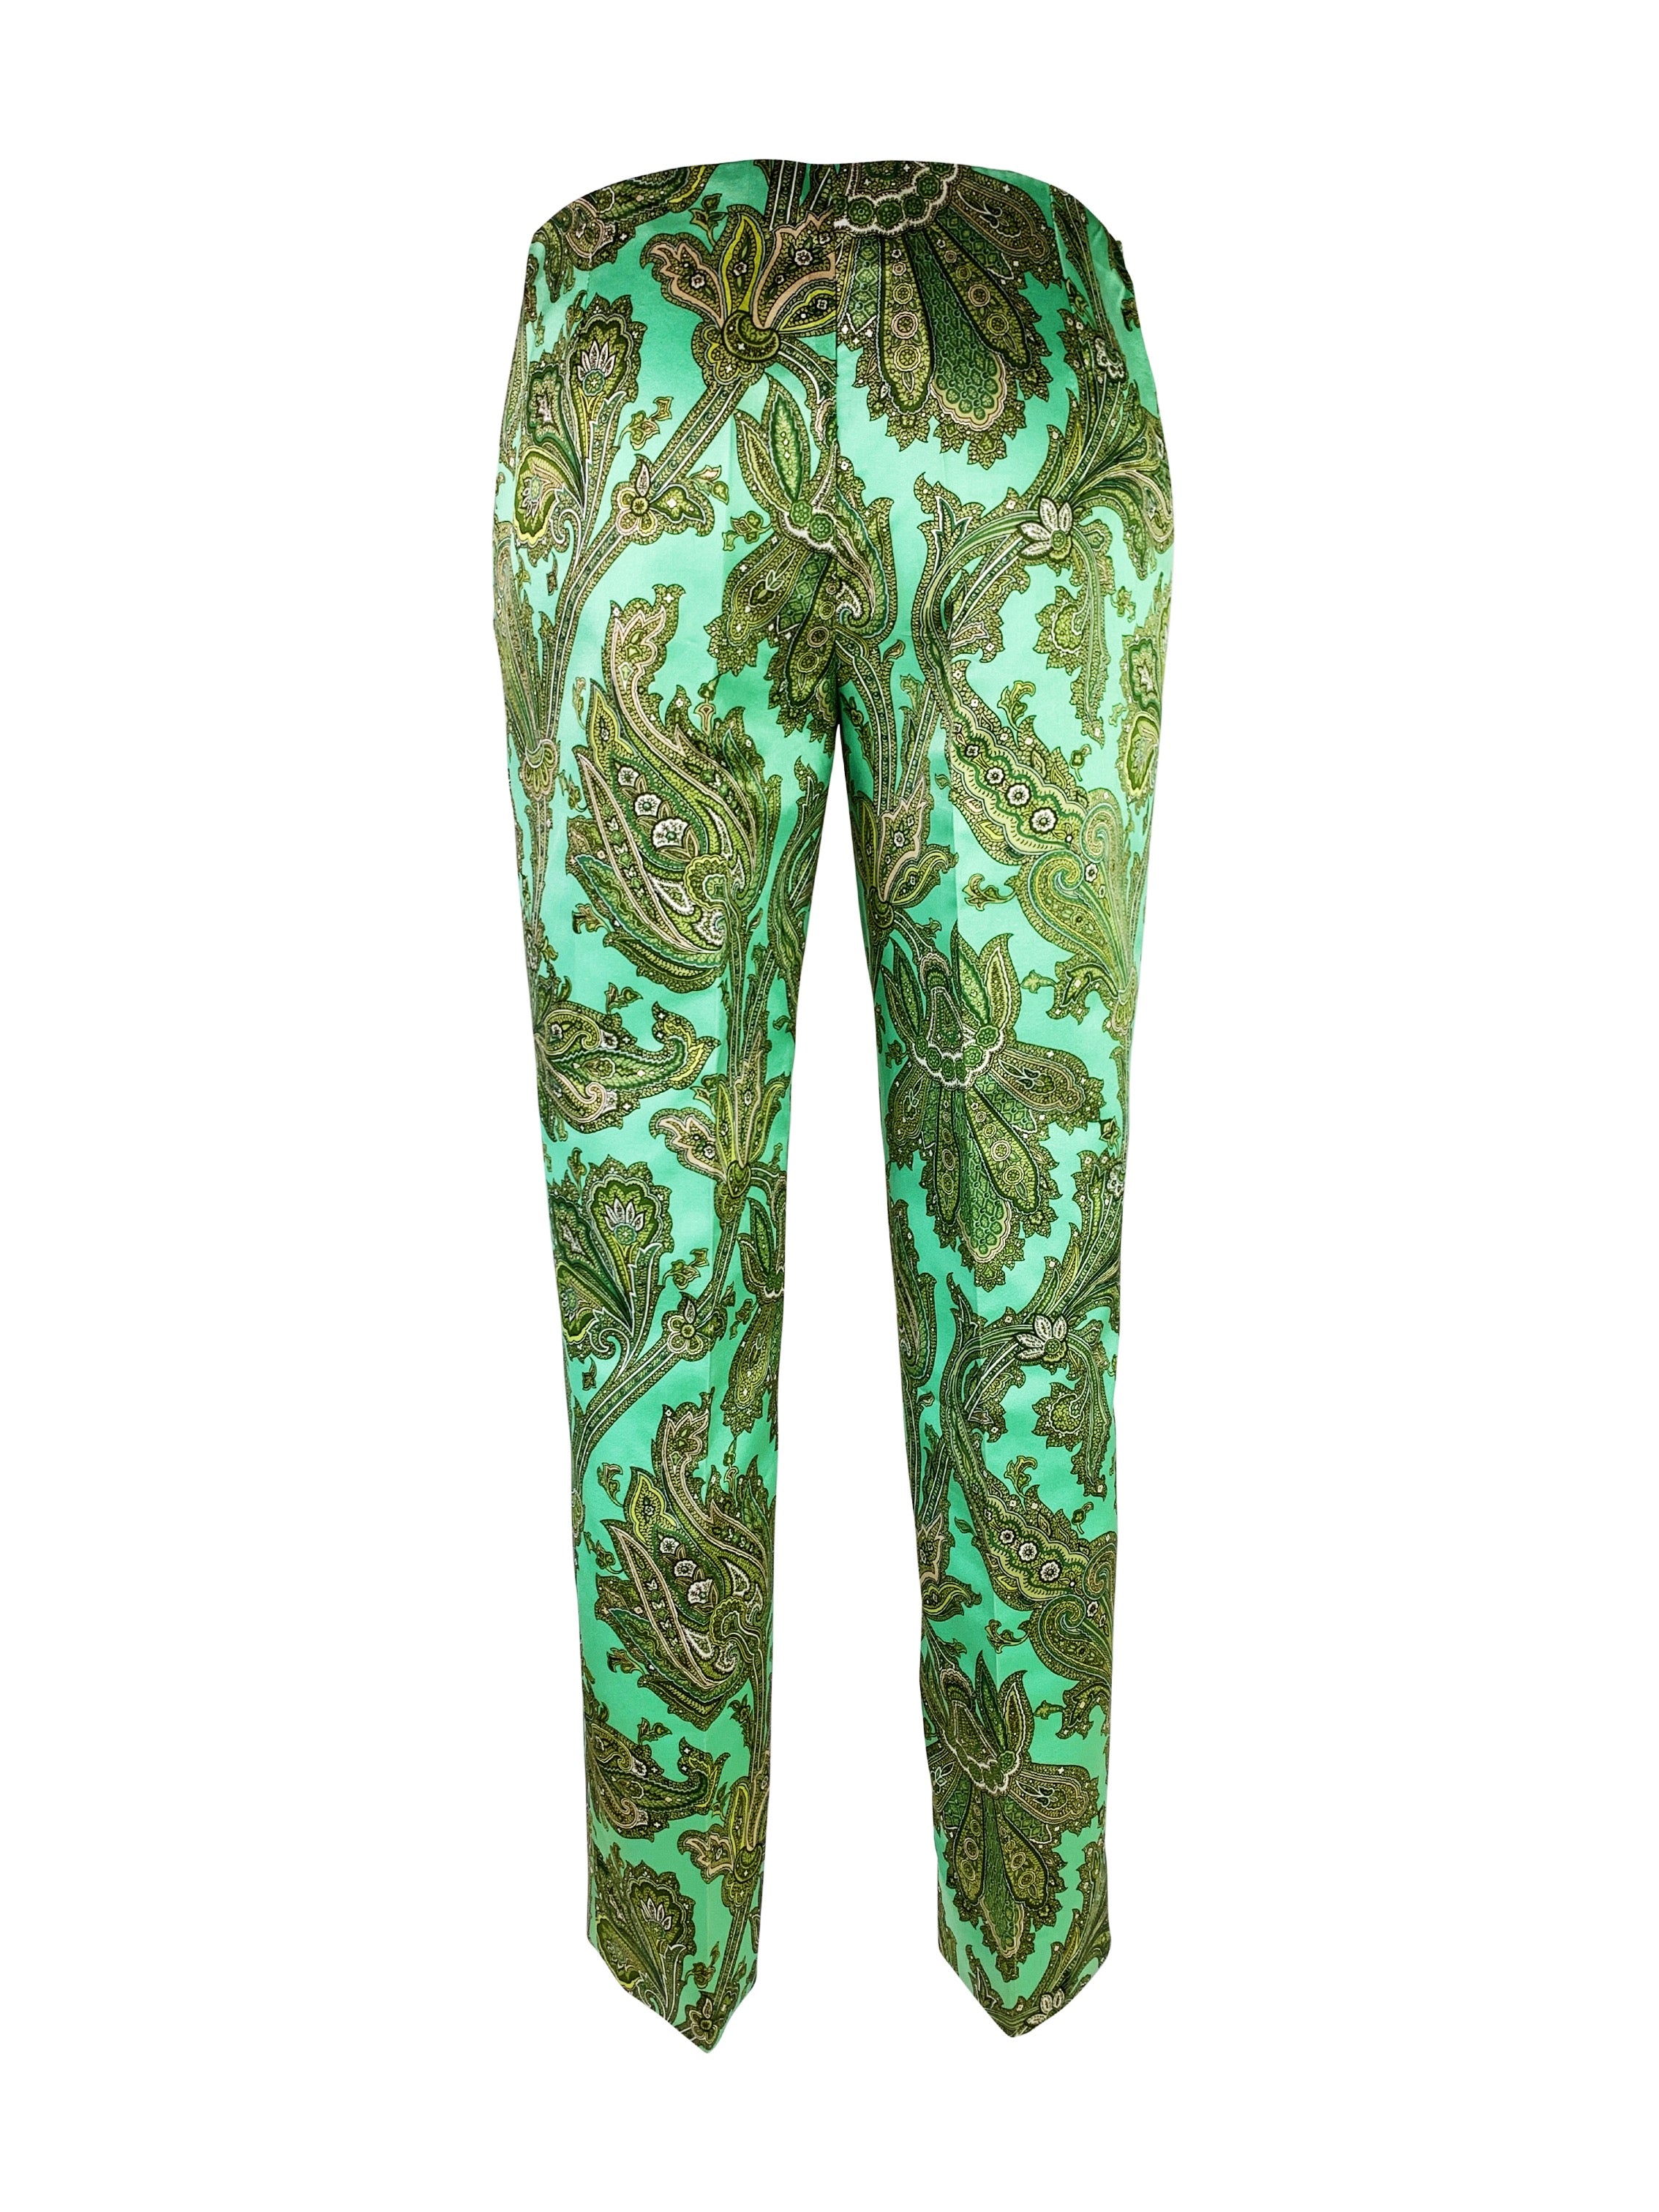 Dolce & Gabbana Spring 2000 Paisley Print Trousers